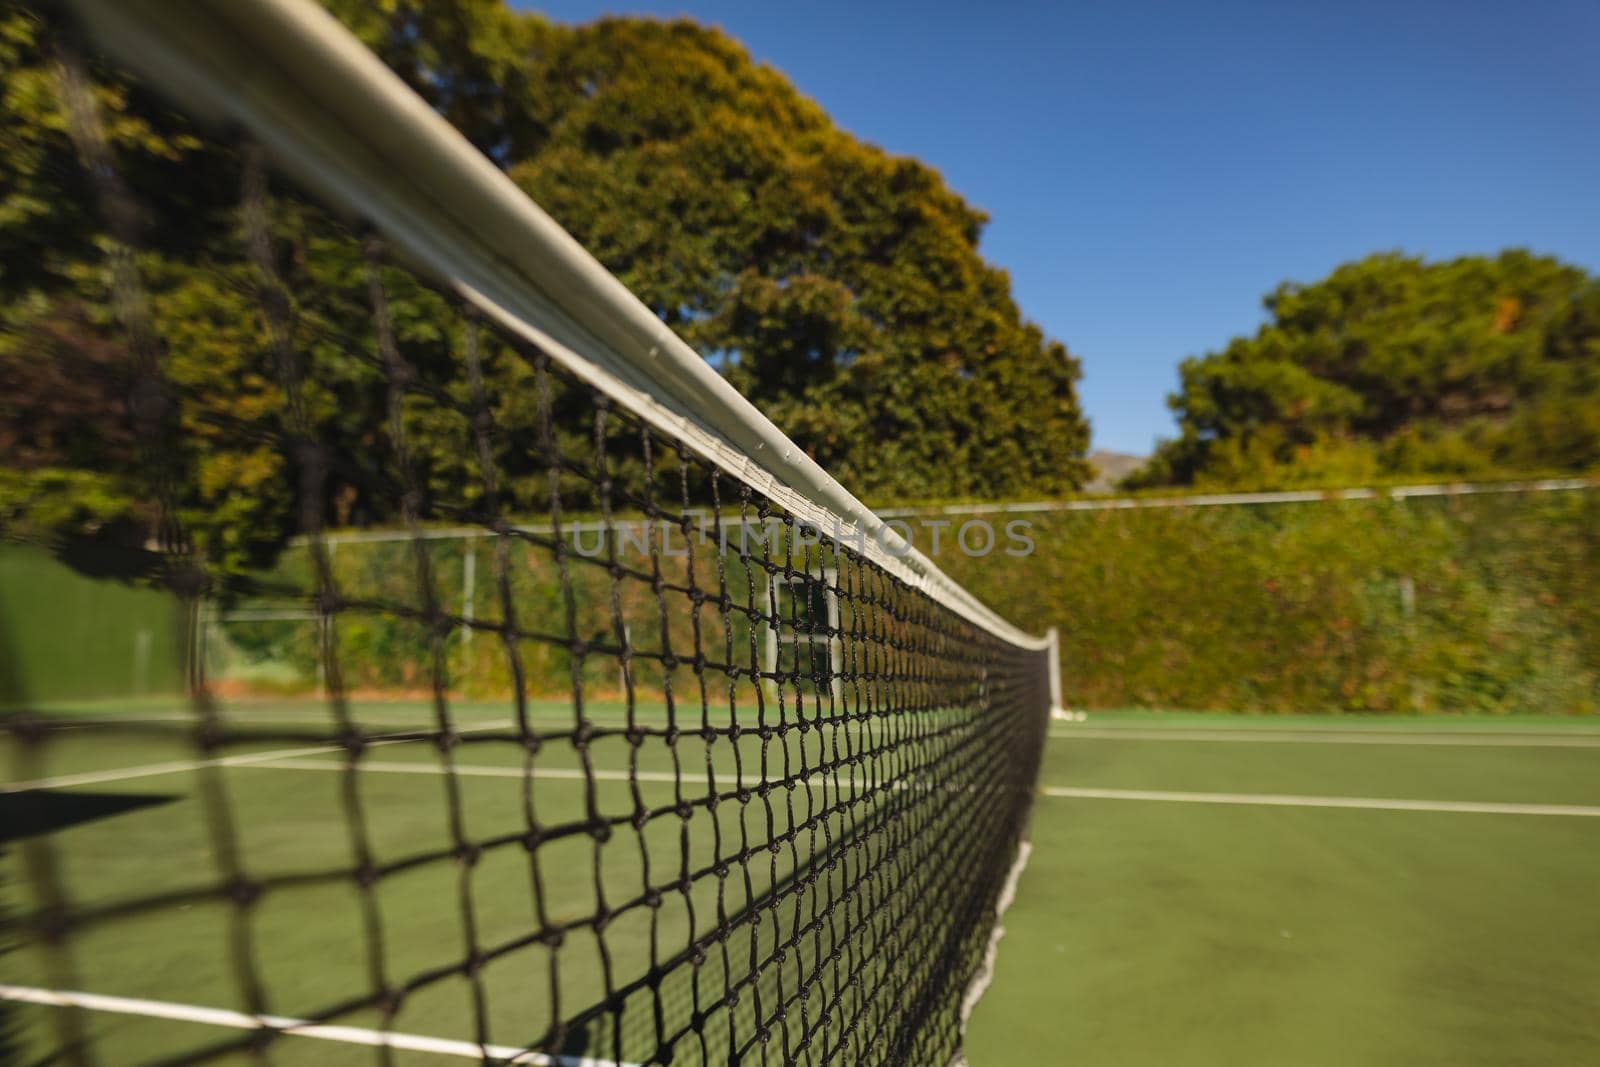 General view of tennis court and tennis net on sunny day by Wavebreakmedia